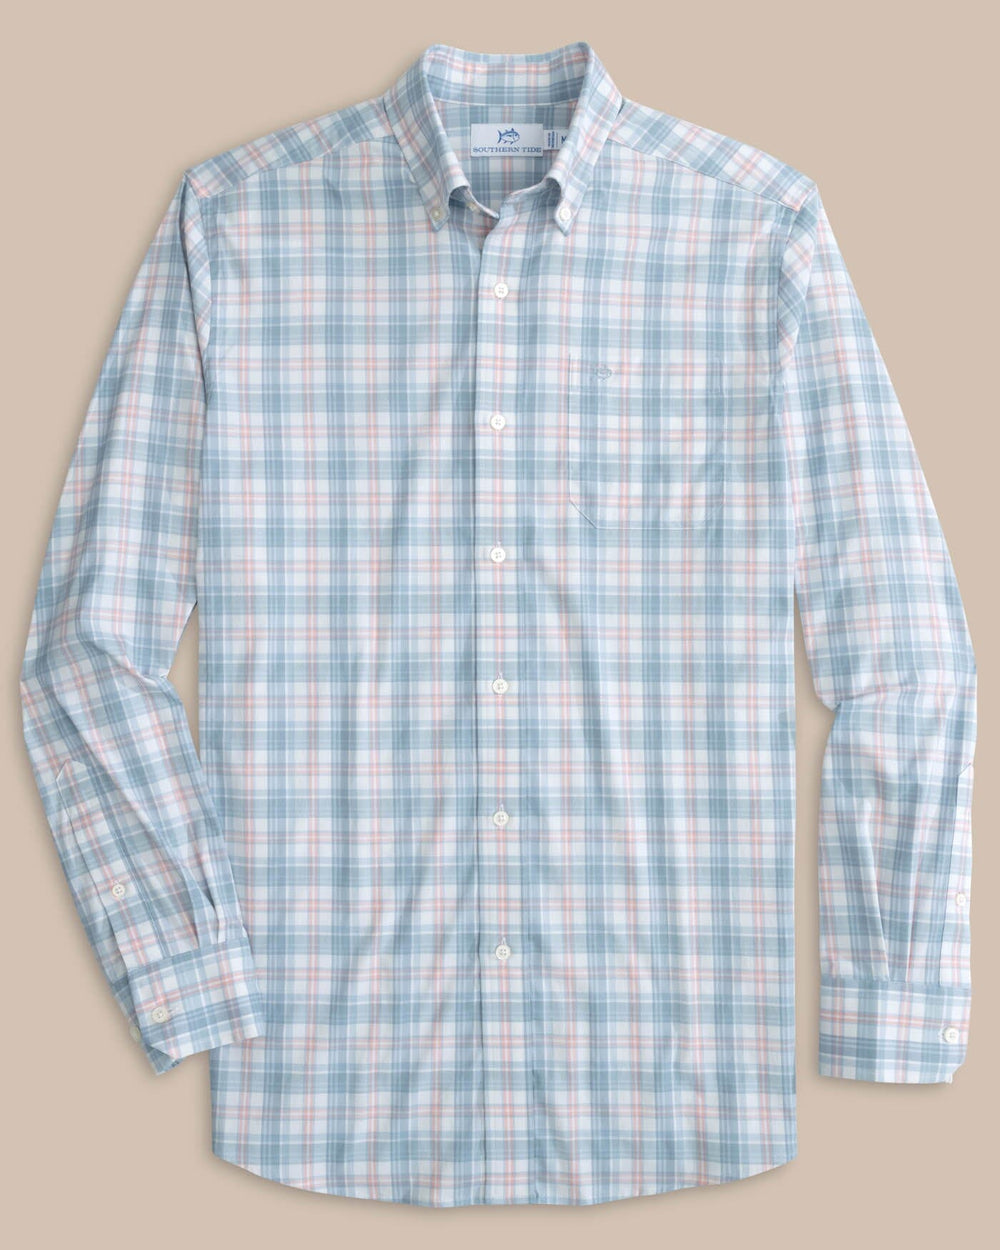 The front view of the Southern Tide Intercoastal West End Plaid Long Sleeve Sport Shirt by Southern Tide - Subdued Blue